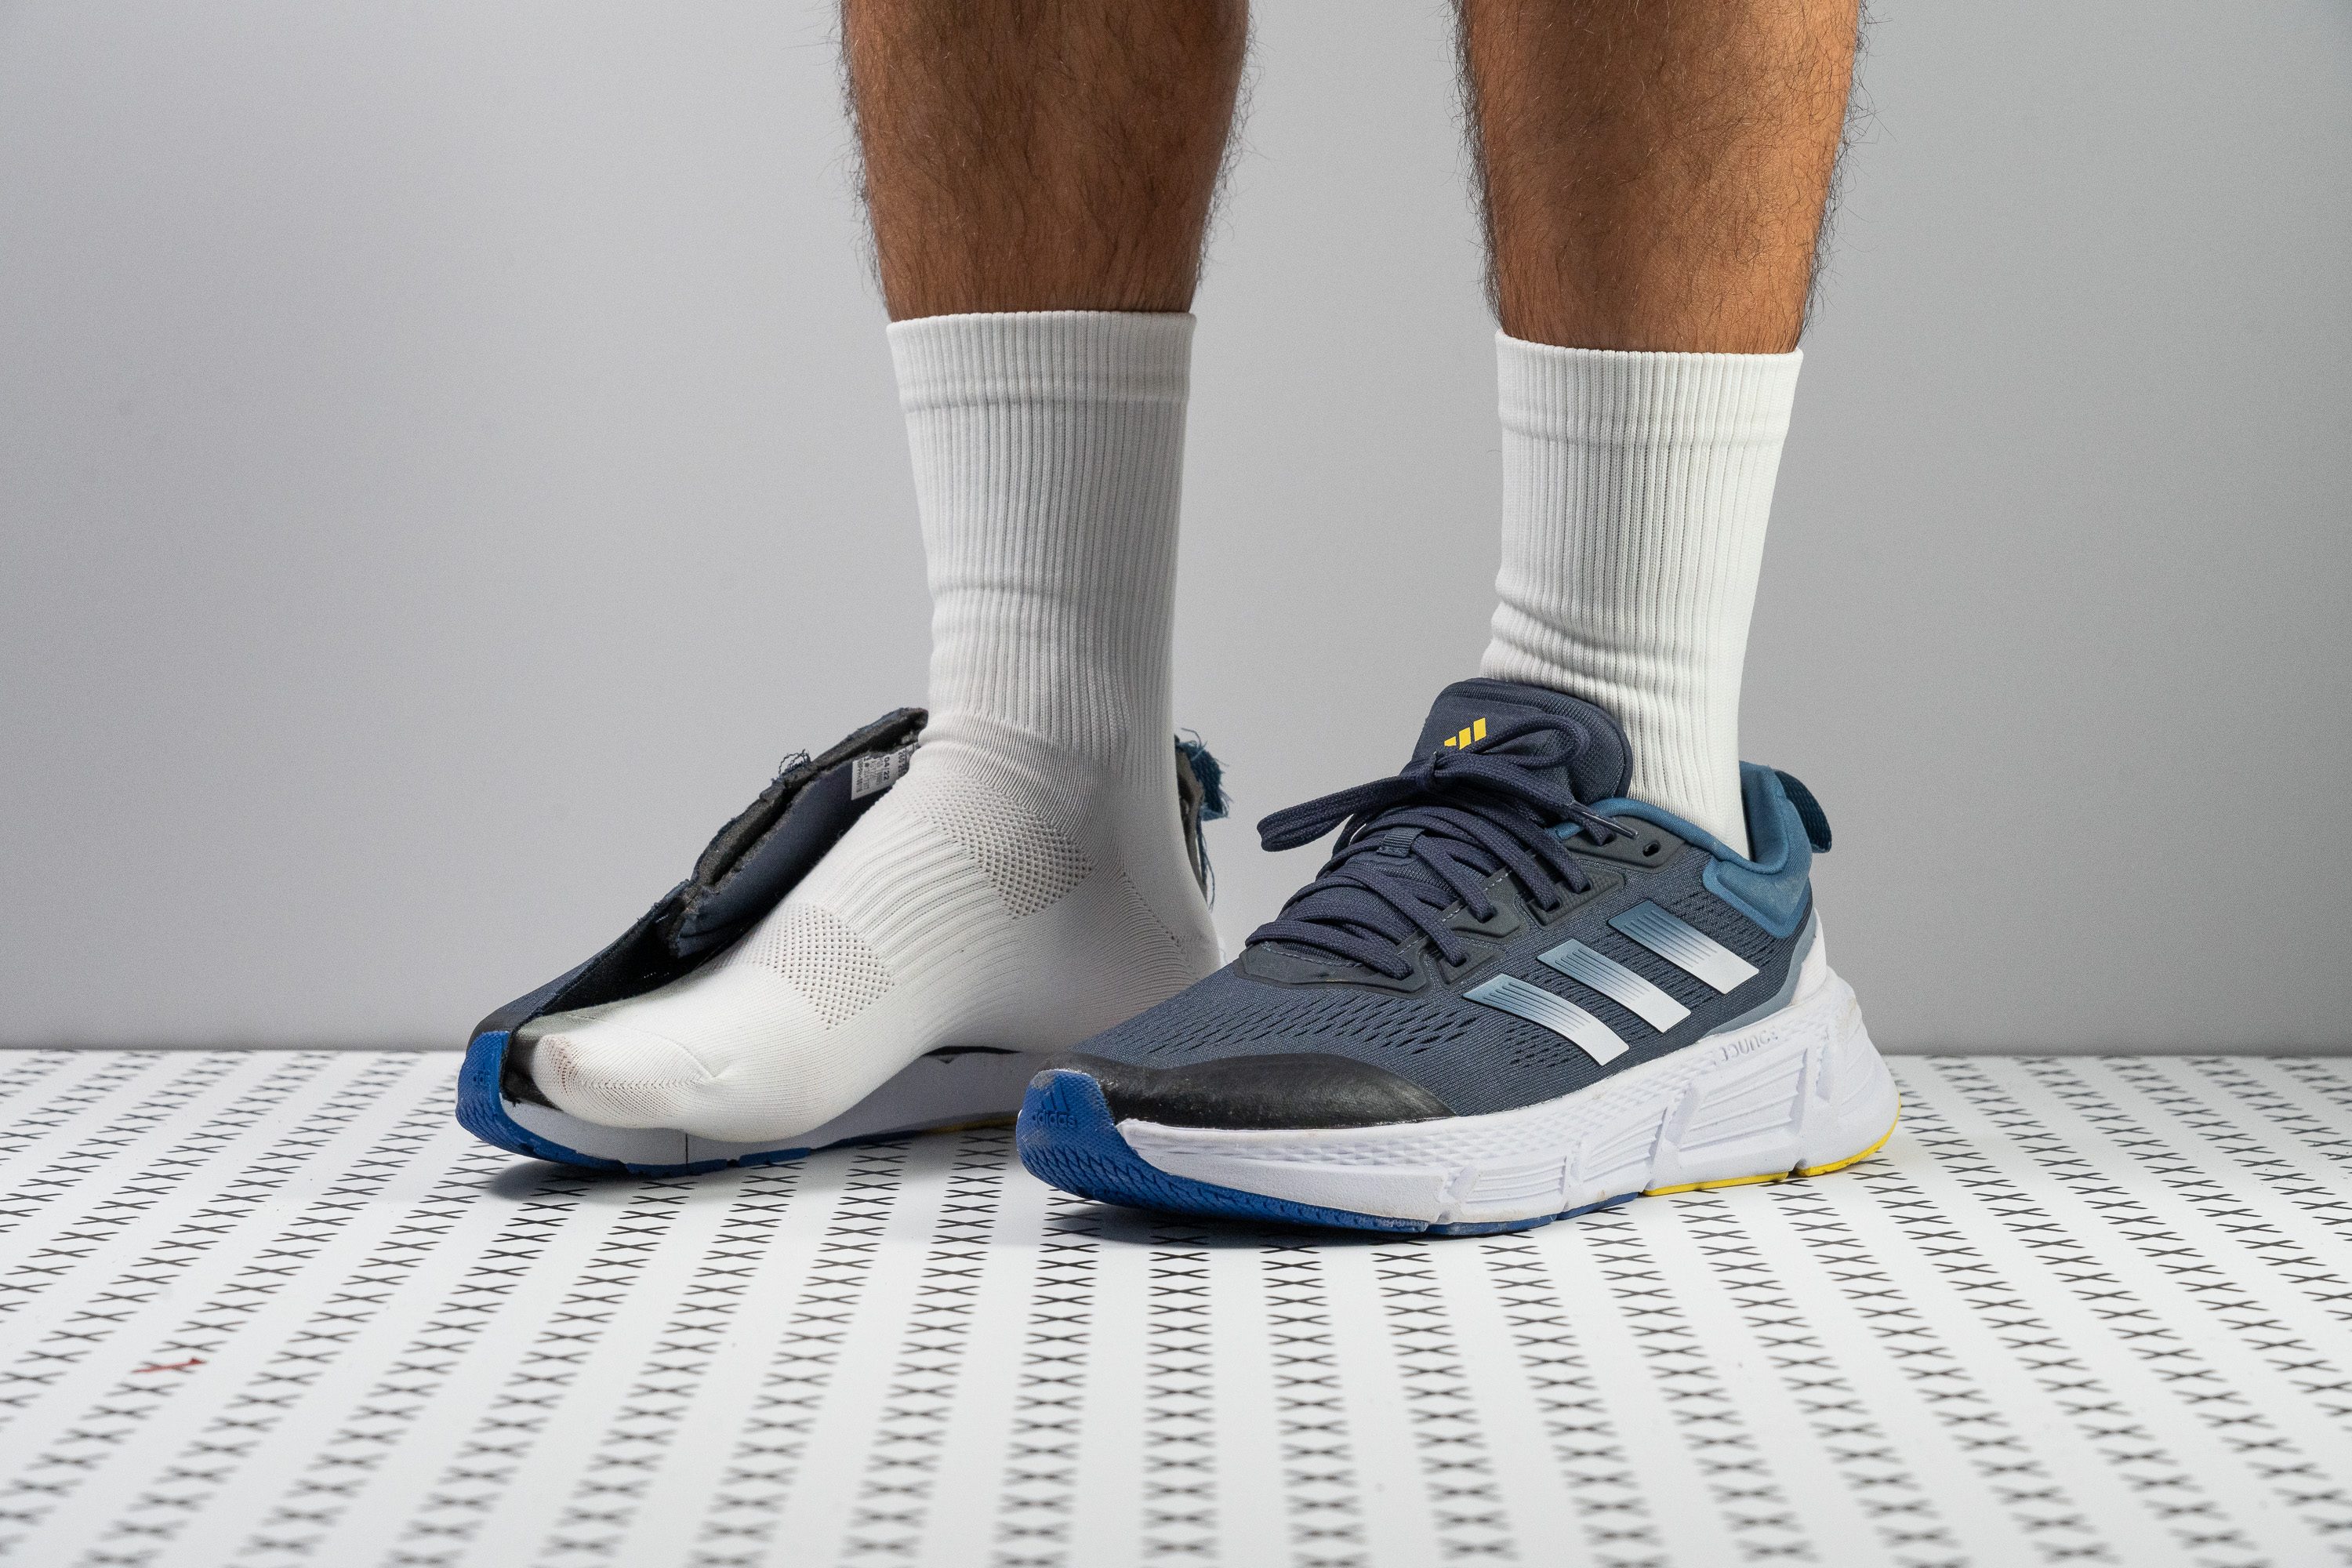 Adidas Adizero SL Review: Versatile and Affordable Daily Trainer